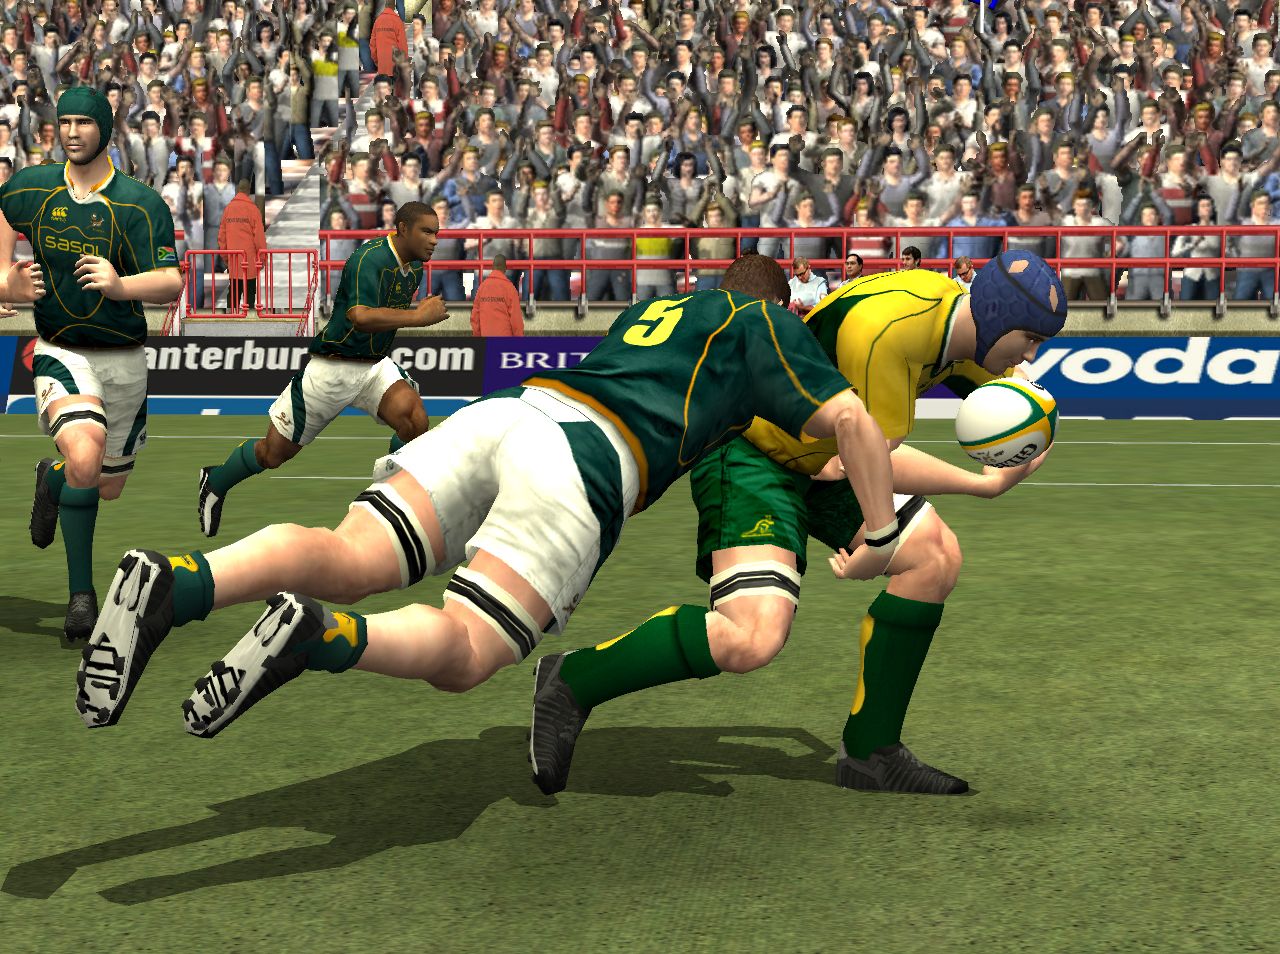 download rugby 08 pc window